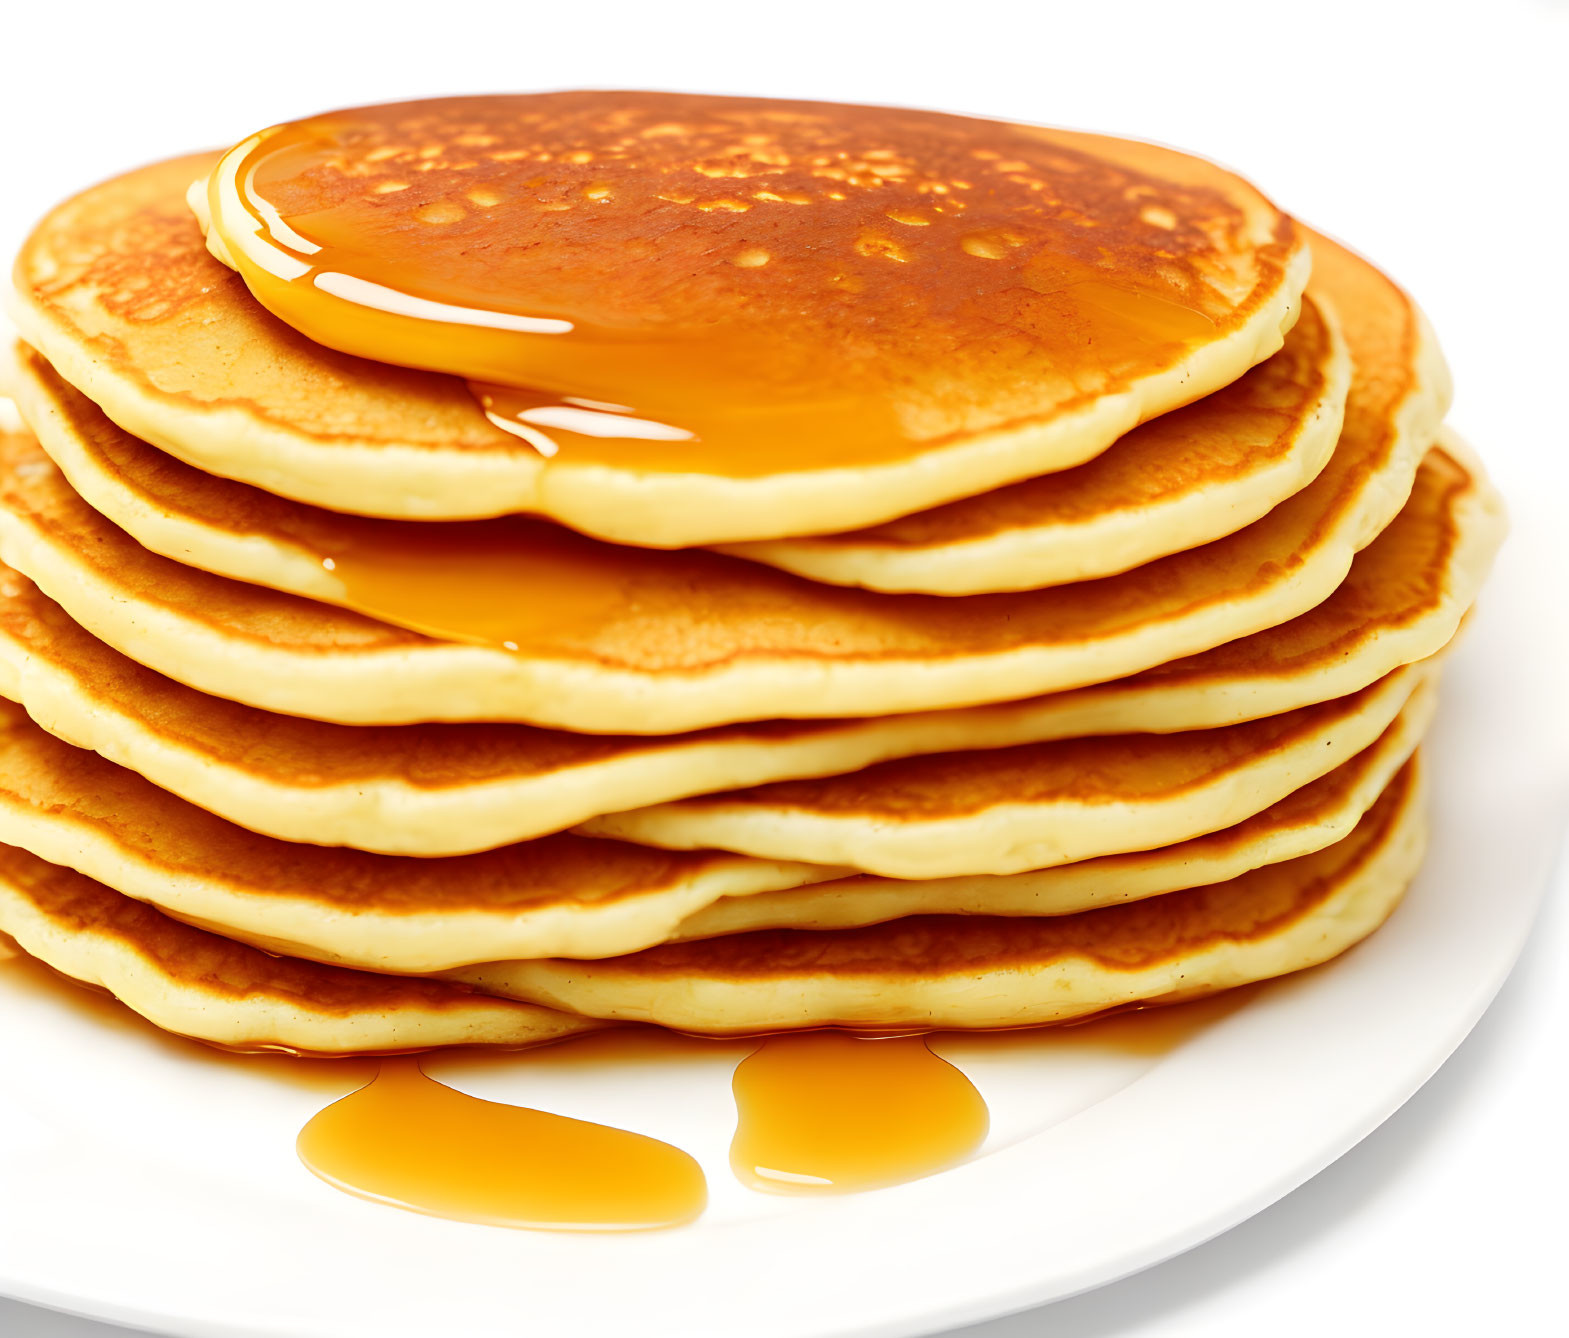 Golden pancakes with syrup on white plate